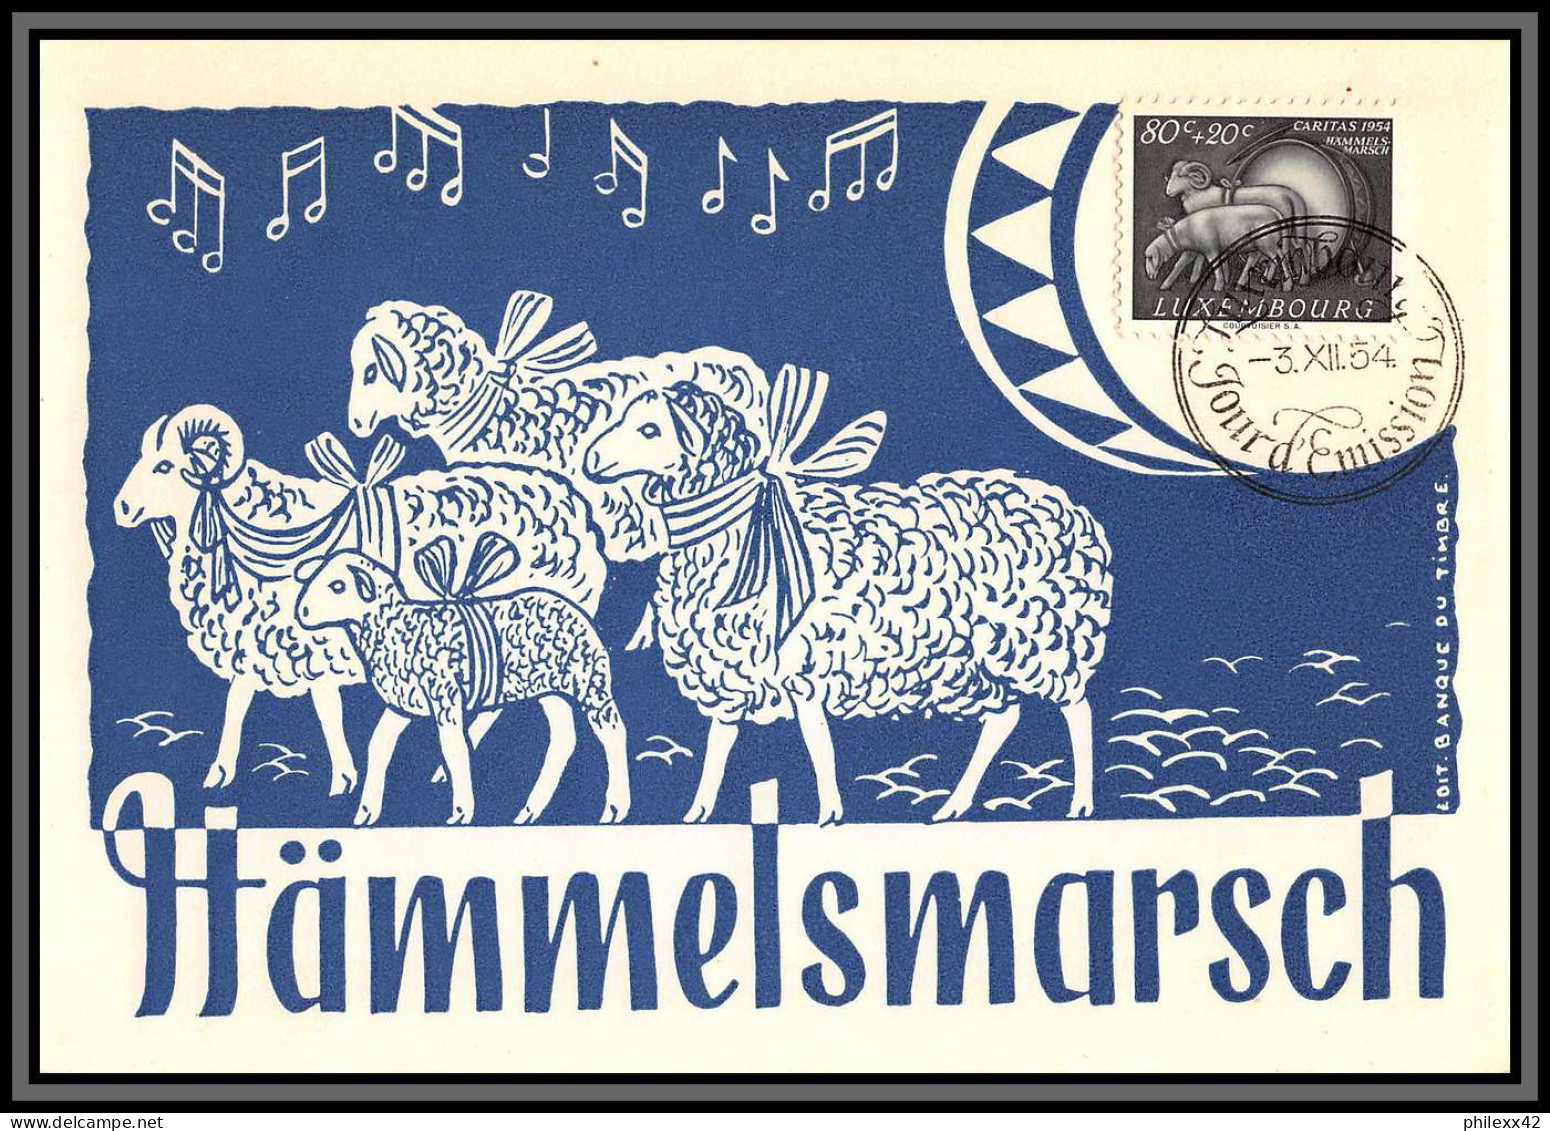 56843a N°484/486 belier mouton ram sheep cheval horse coq rooster luxembourg Carte maximum fdc édition fdc 1954